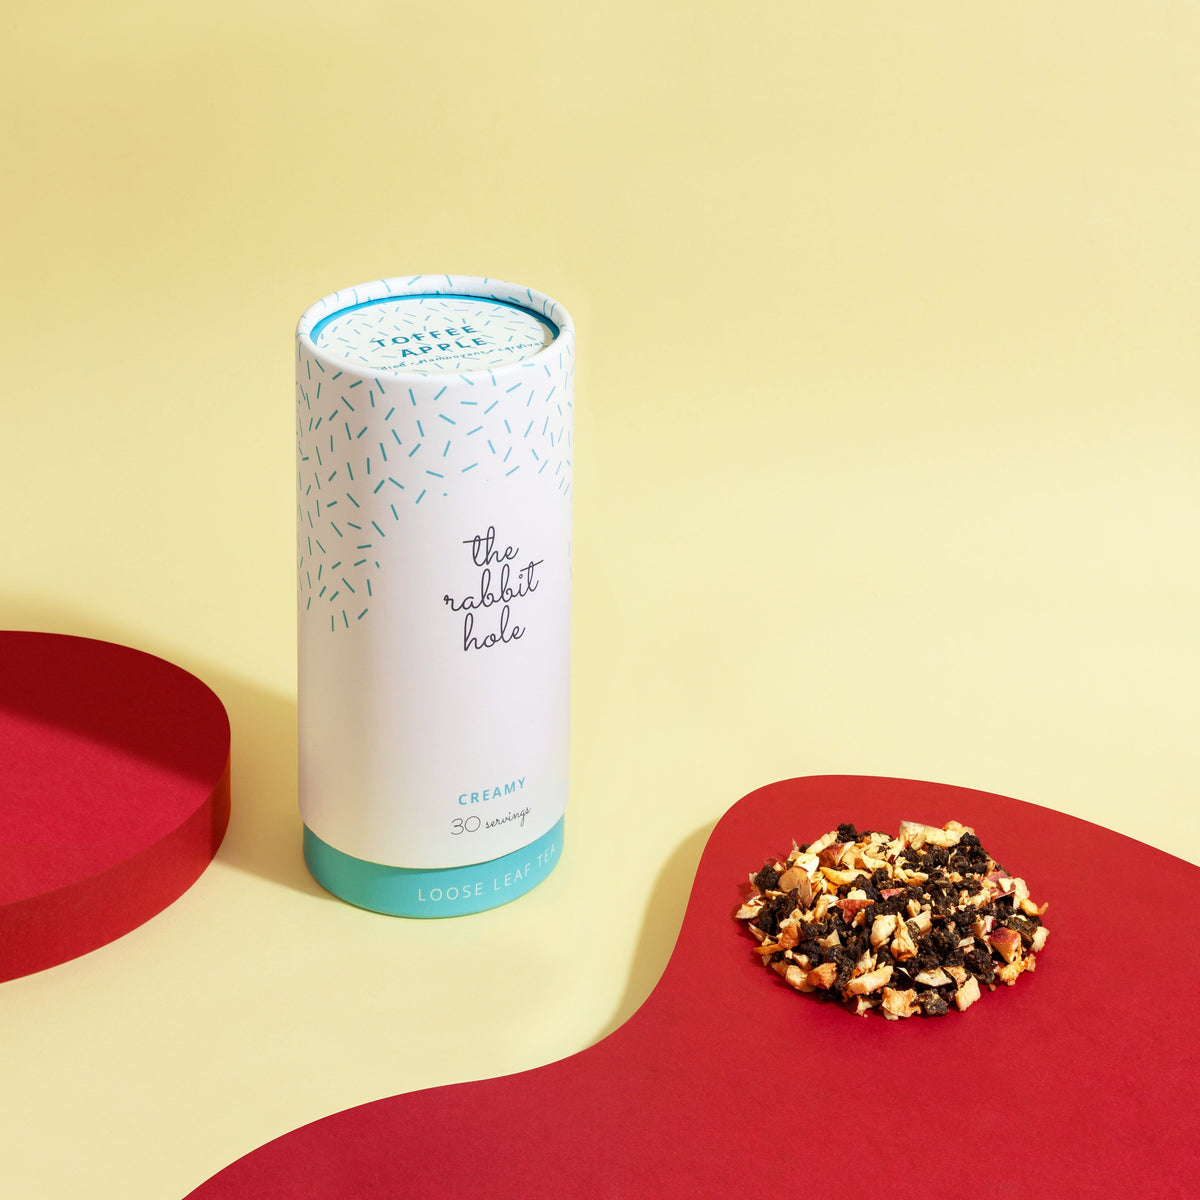 Toffee Apple loose leaf Creamy tea by The Rabbit Hole - Australian Made Tea - canister on a colourful yellow and red background